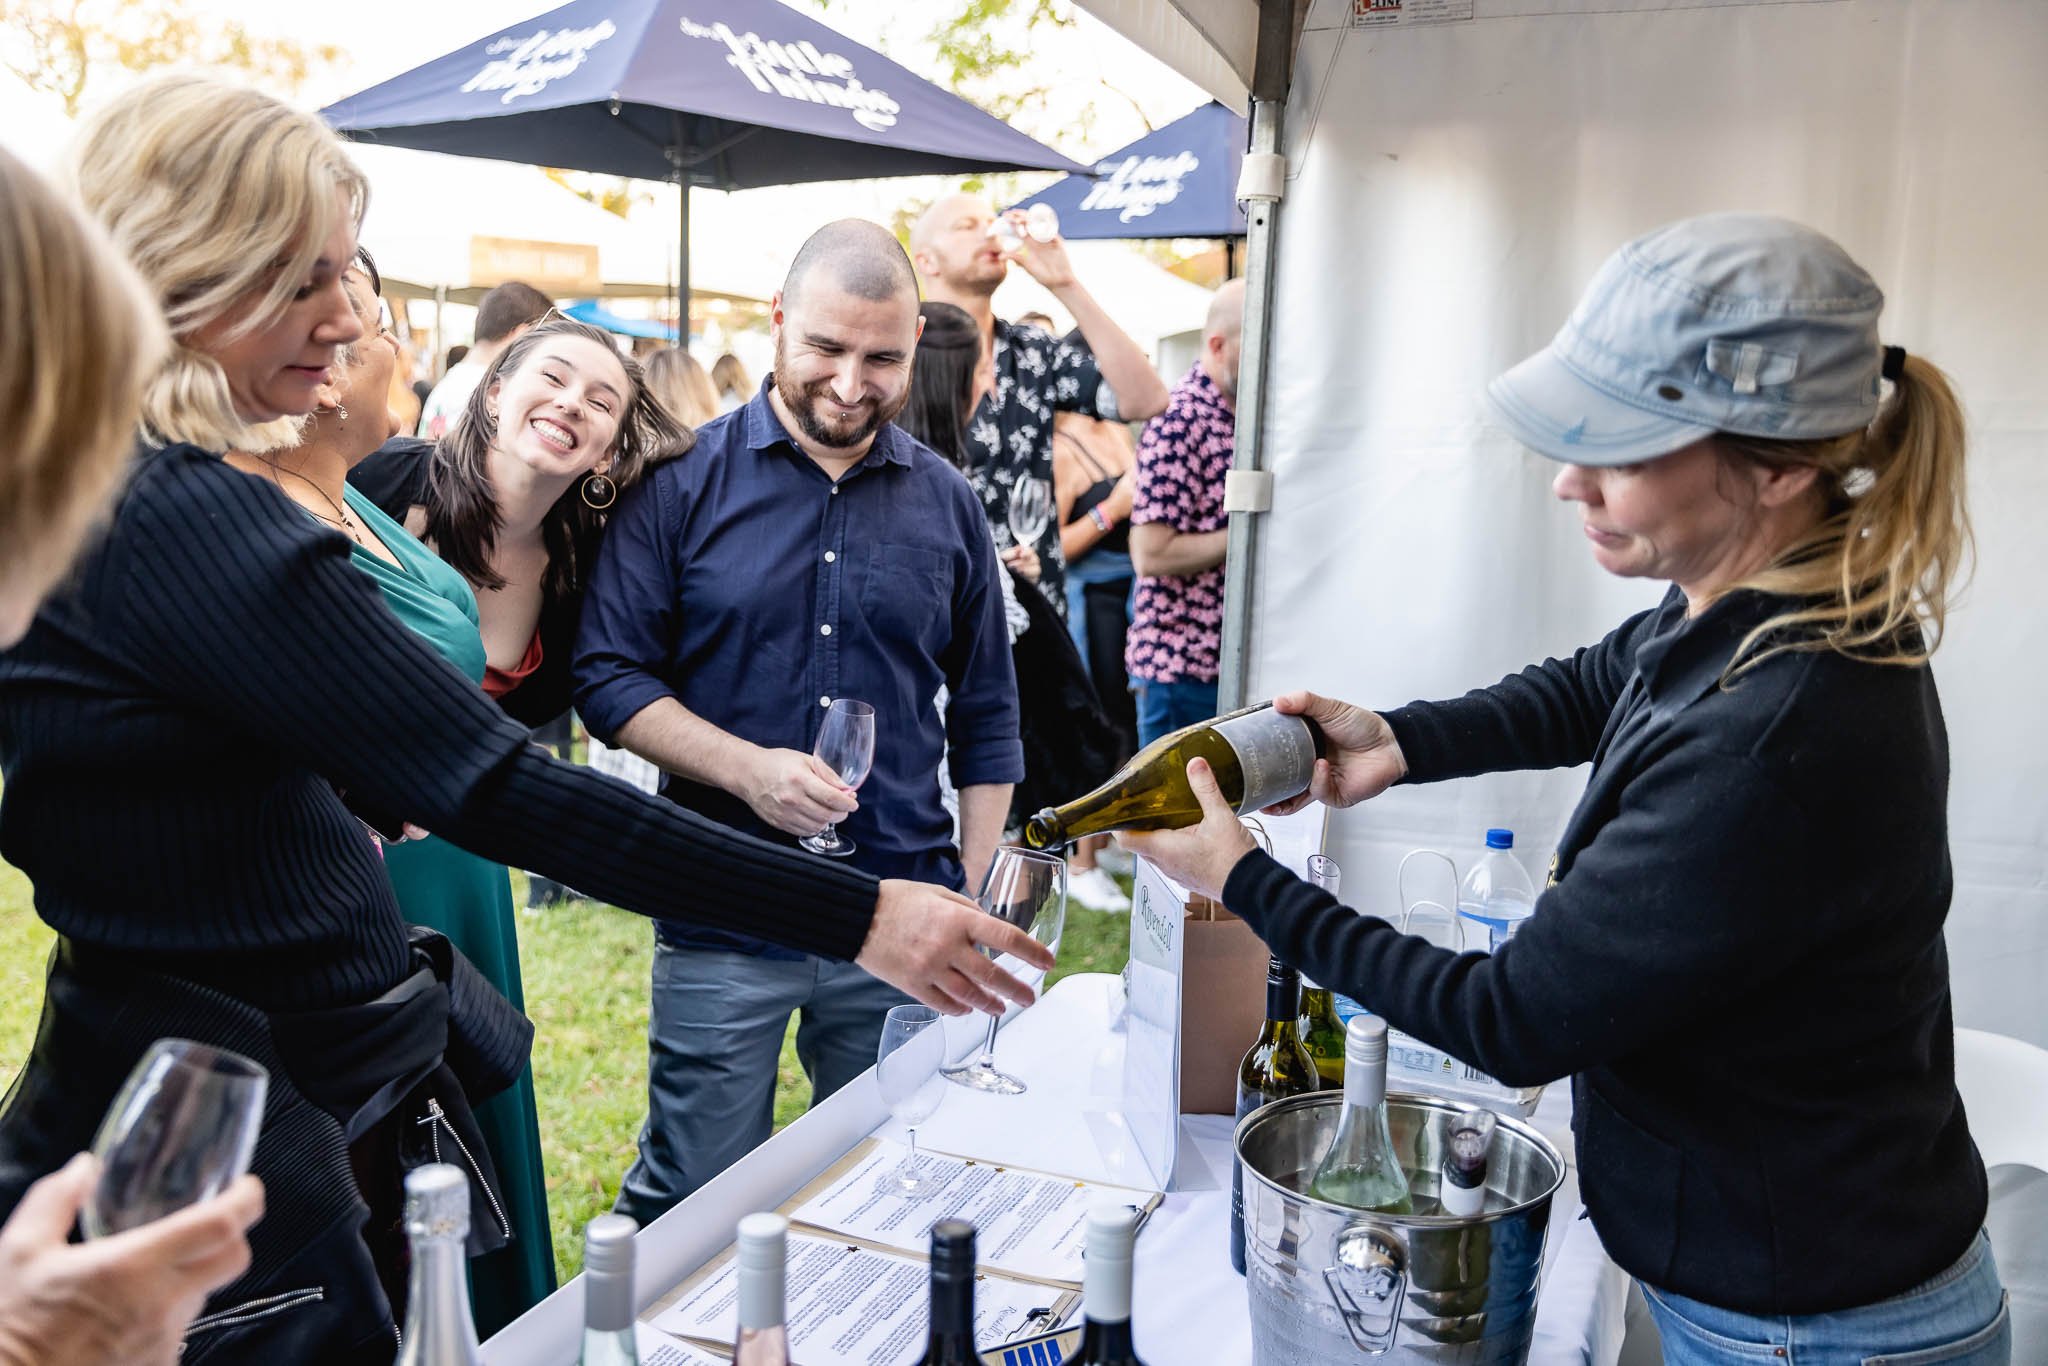 Ammon_Creative-Event_Photography-CMS_Events-UnWined_Subiaco-Image_50.jpg